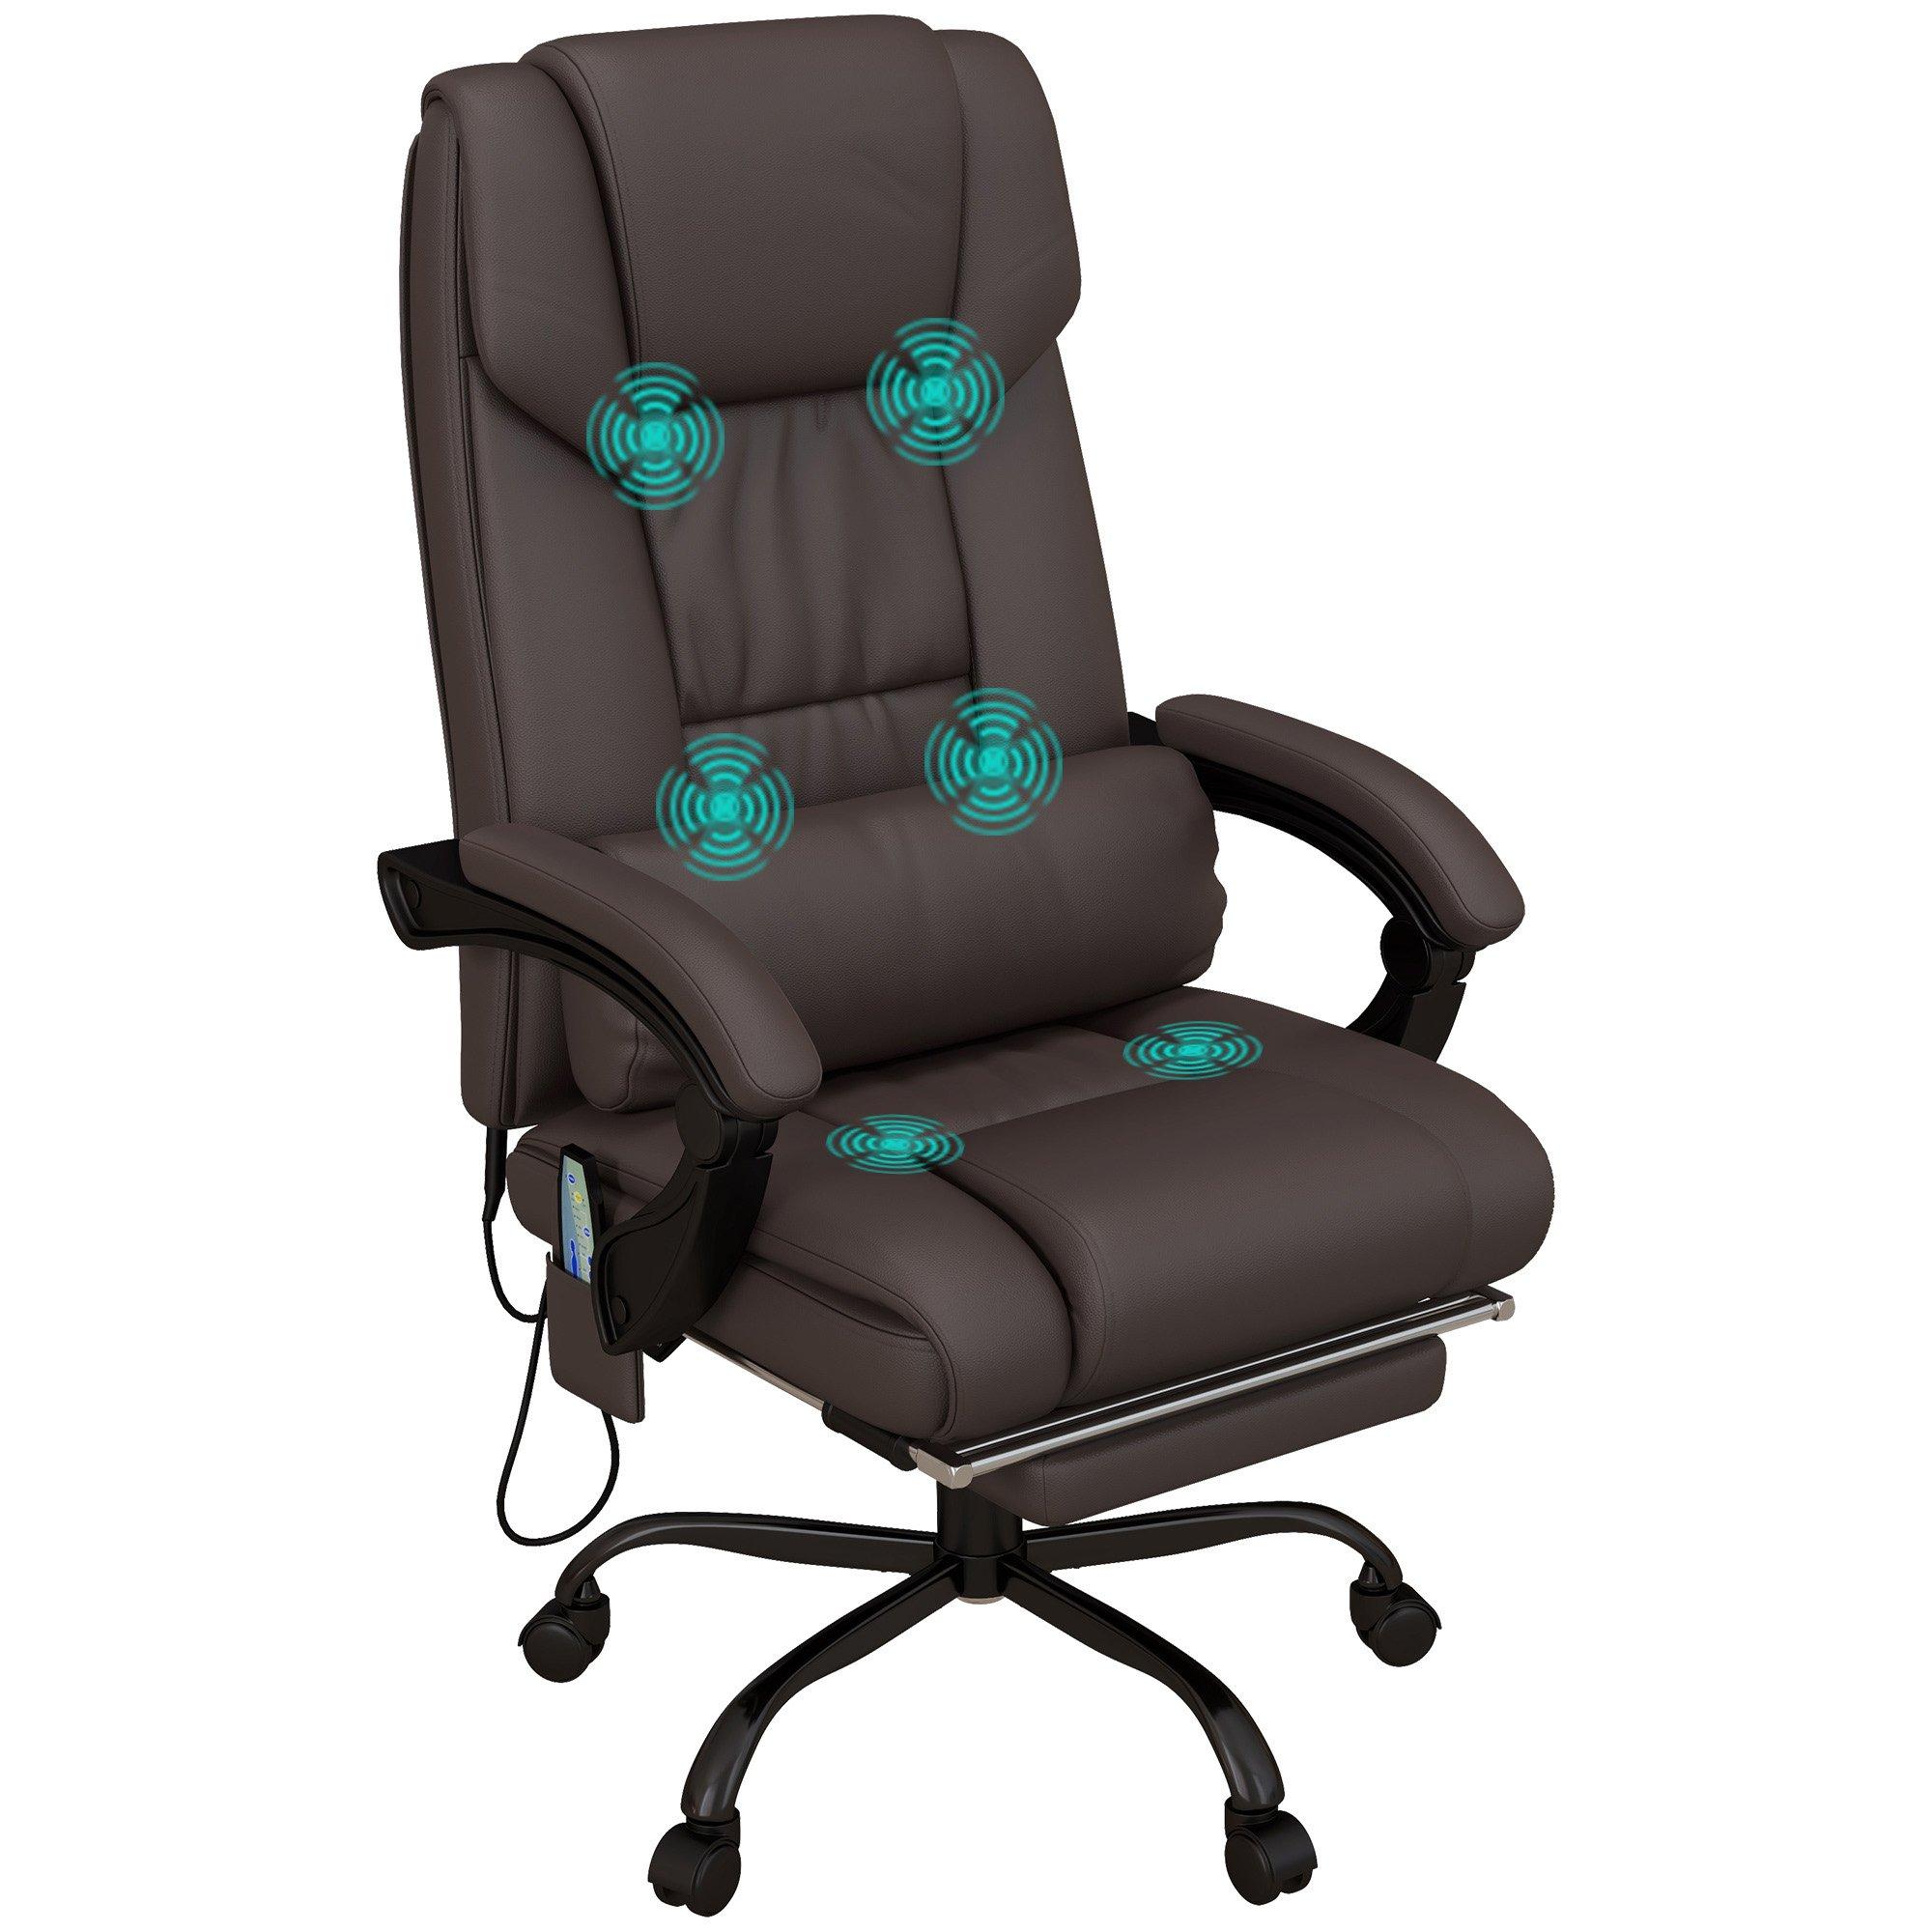 PU Leather Massage Office Chair with 6 Vibration Points Adjustable